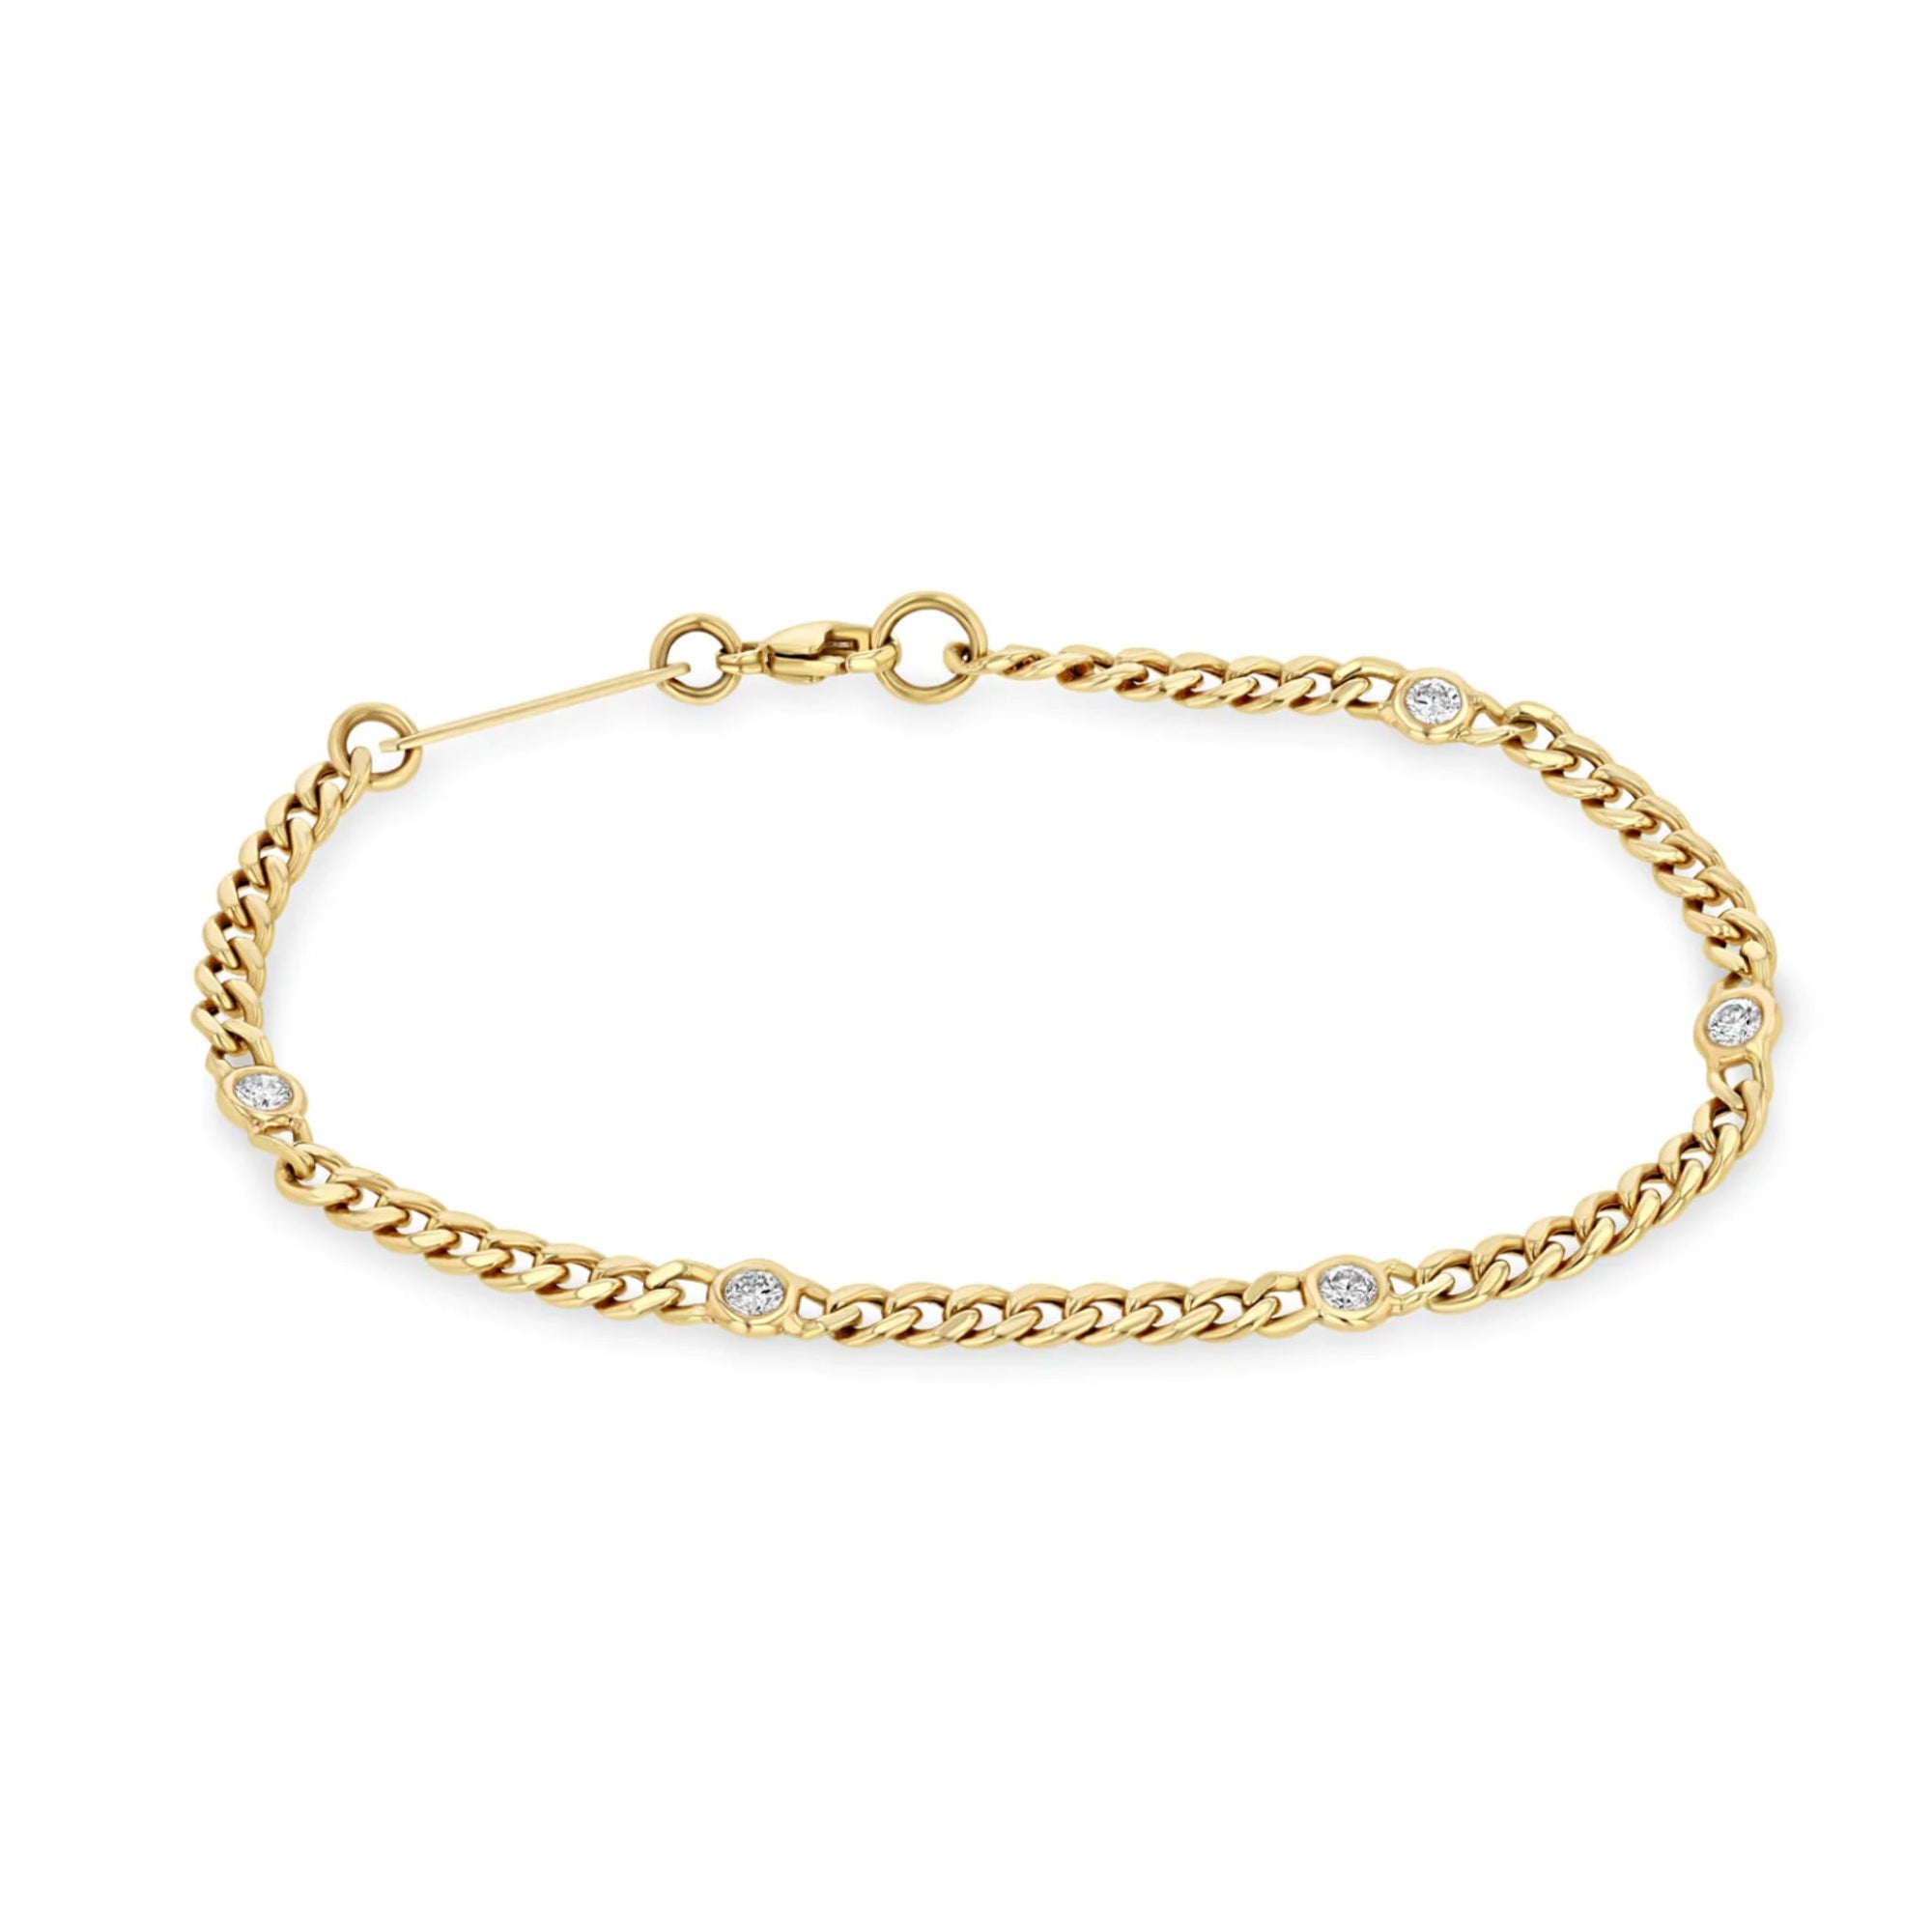 Zoe Chicco 14k Small Curb Chain Bracelet with 5 Floating Diamonds